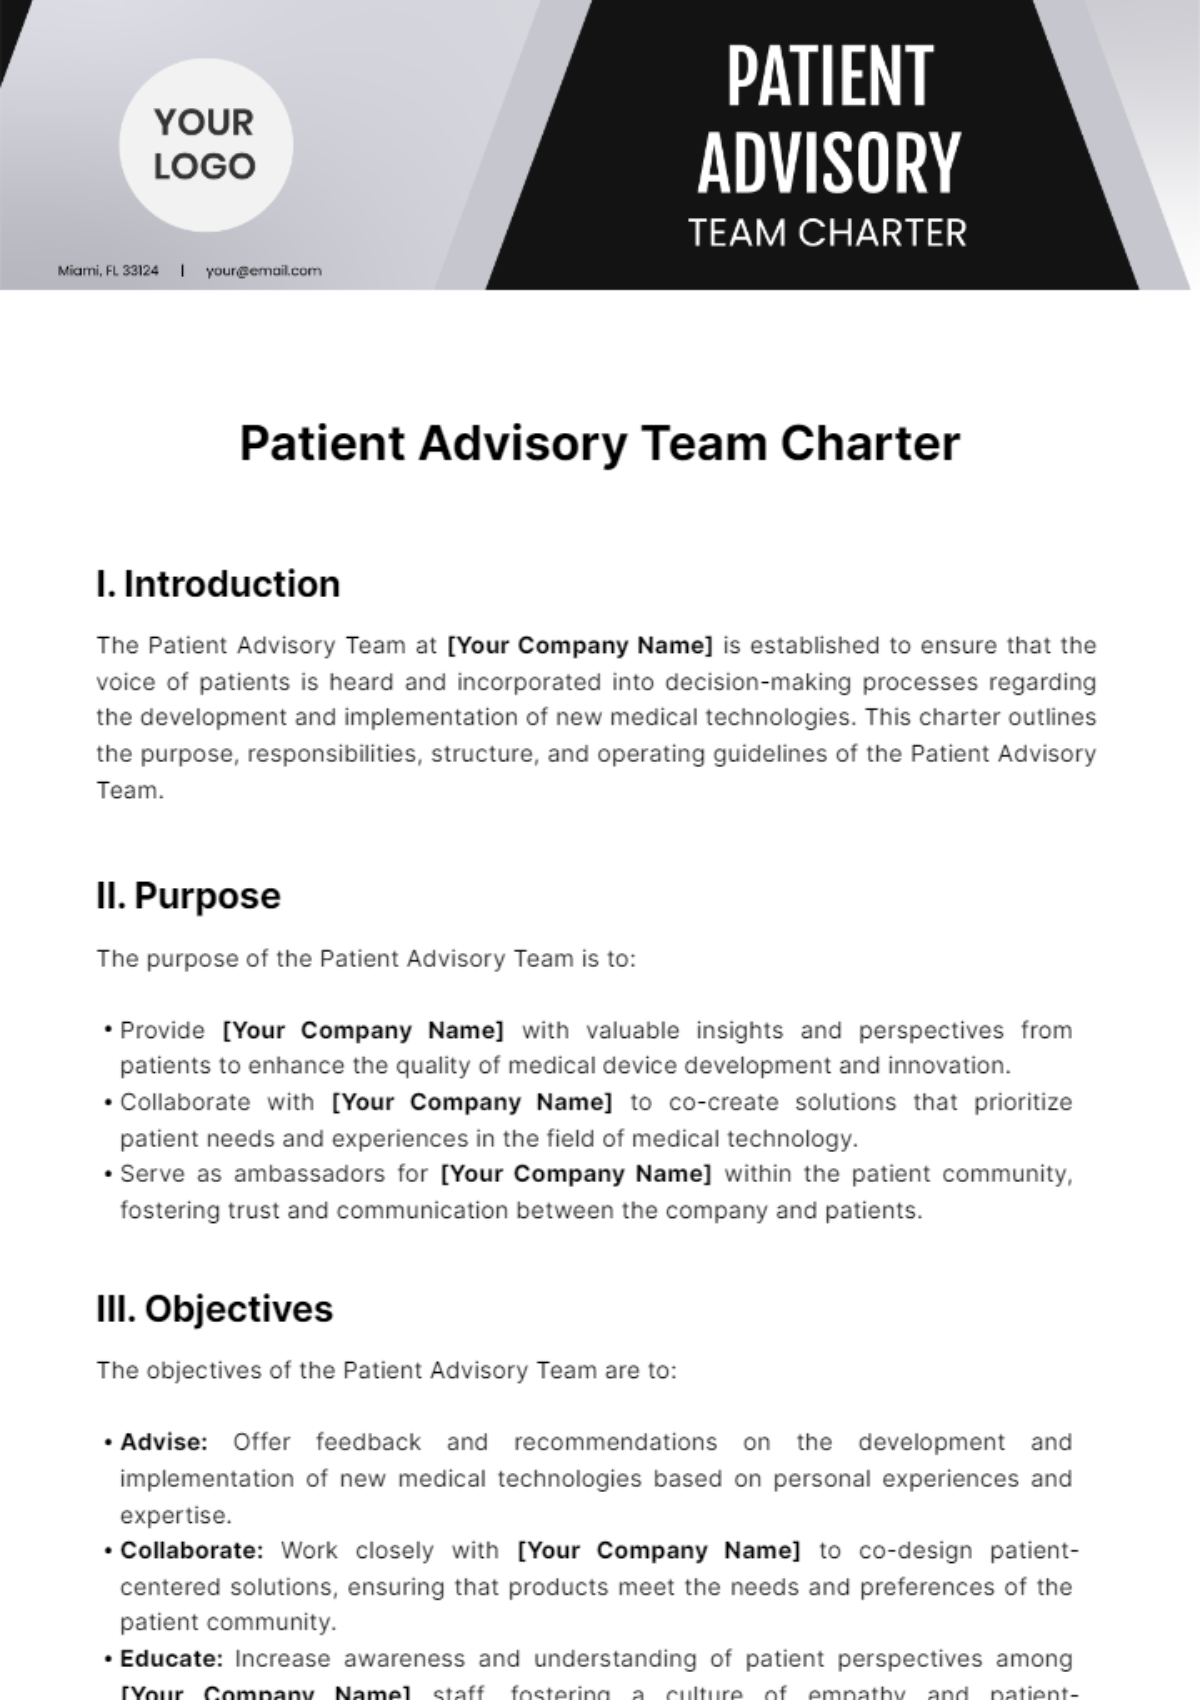 Patient Advisory Team Charter Template